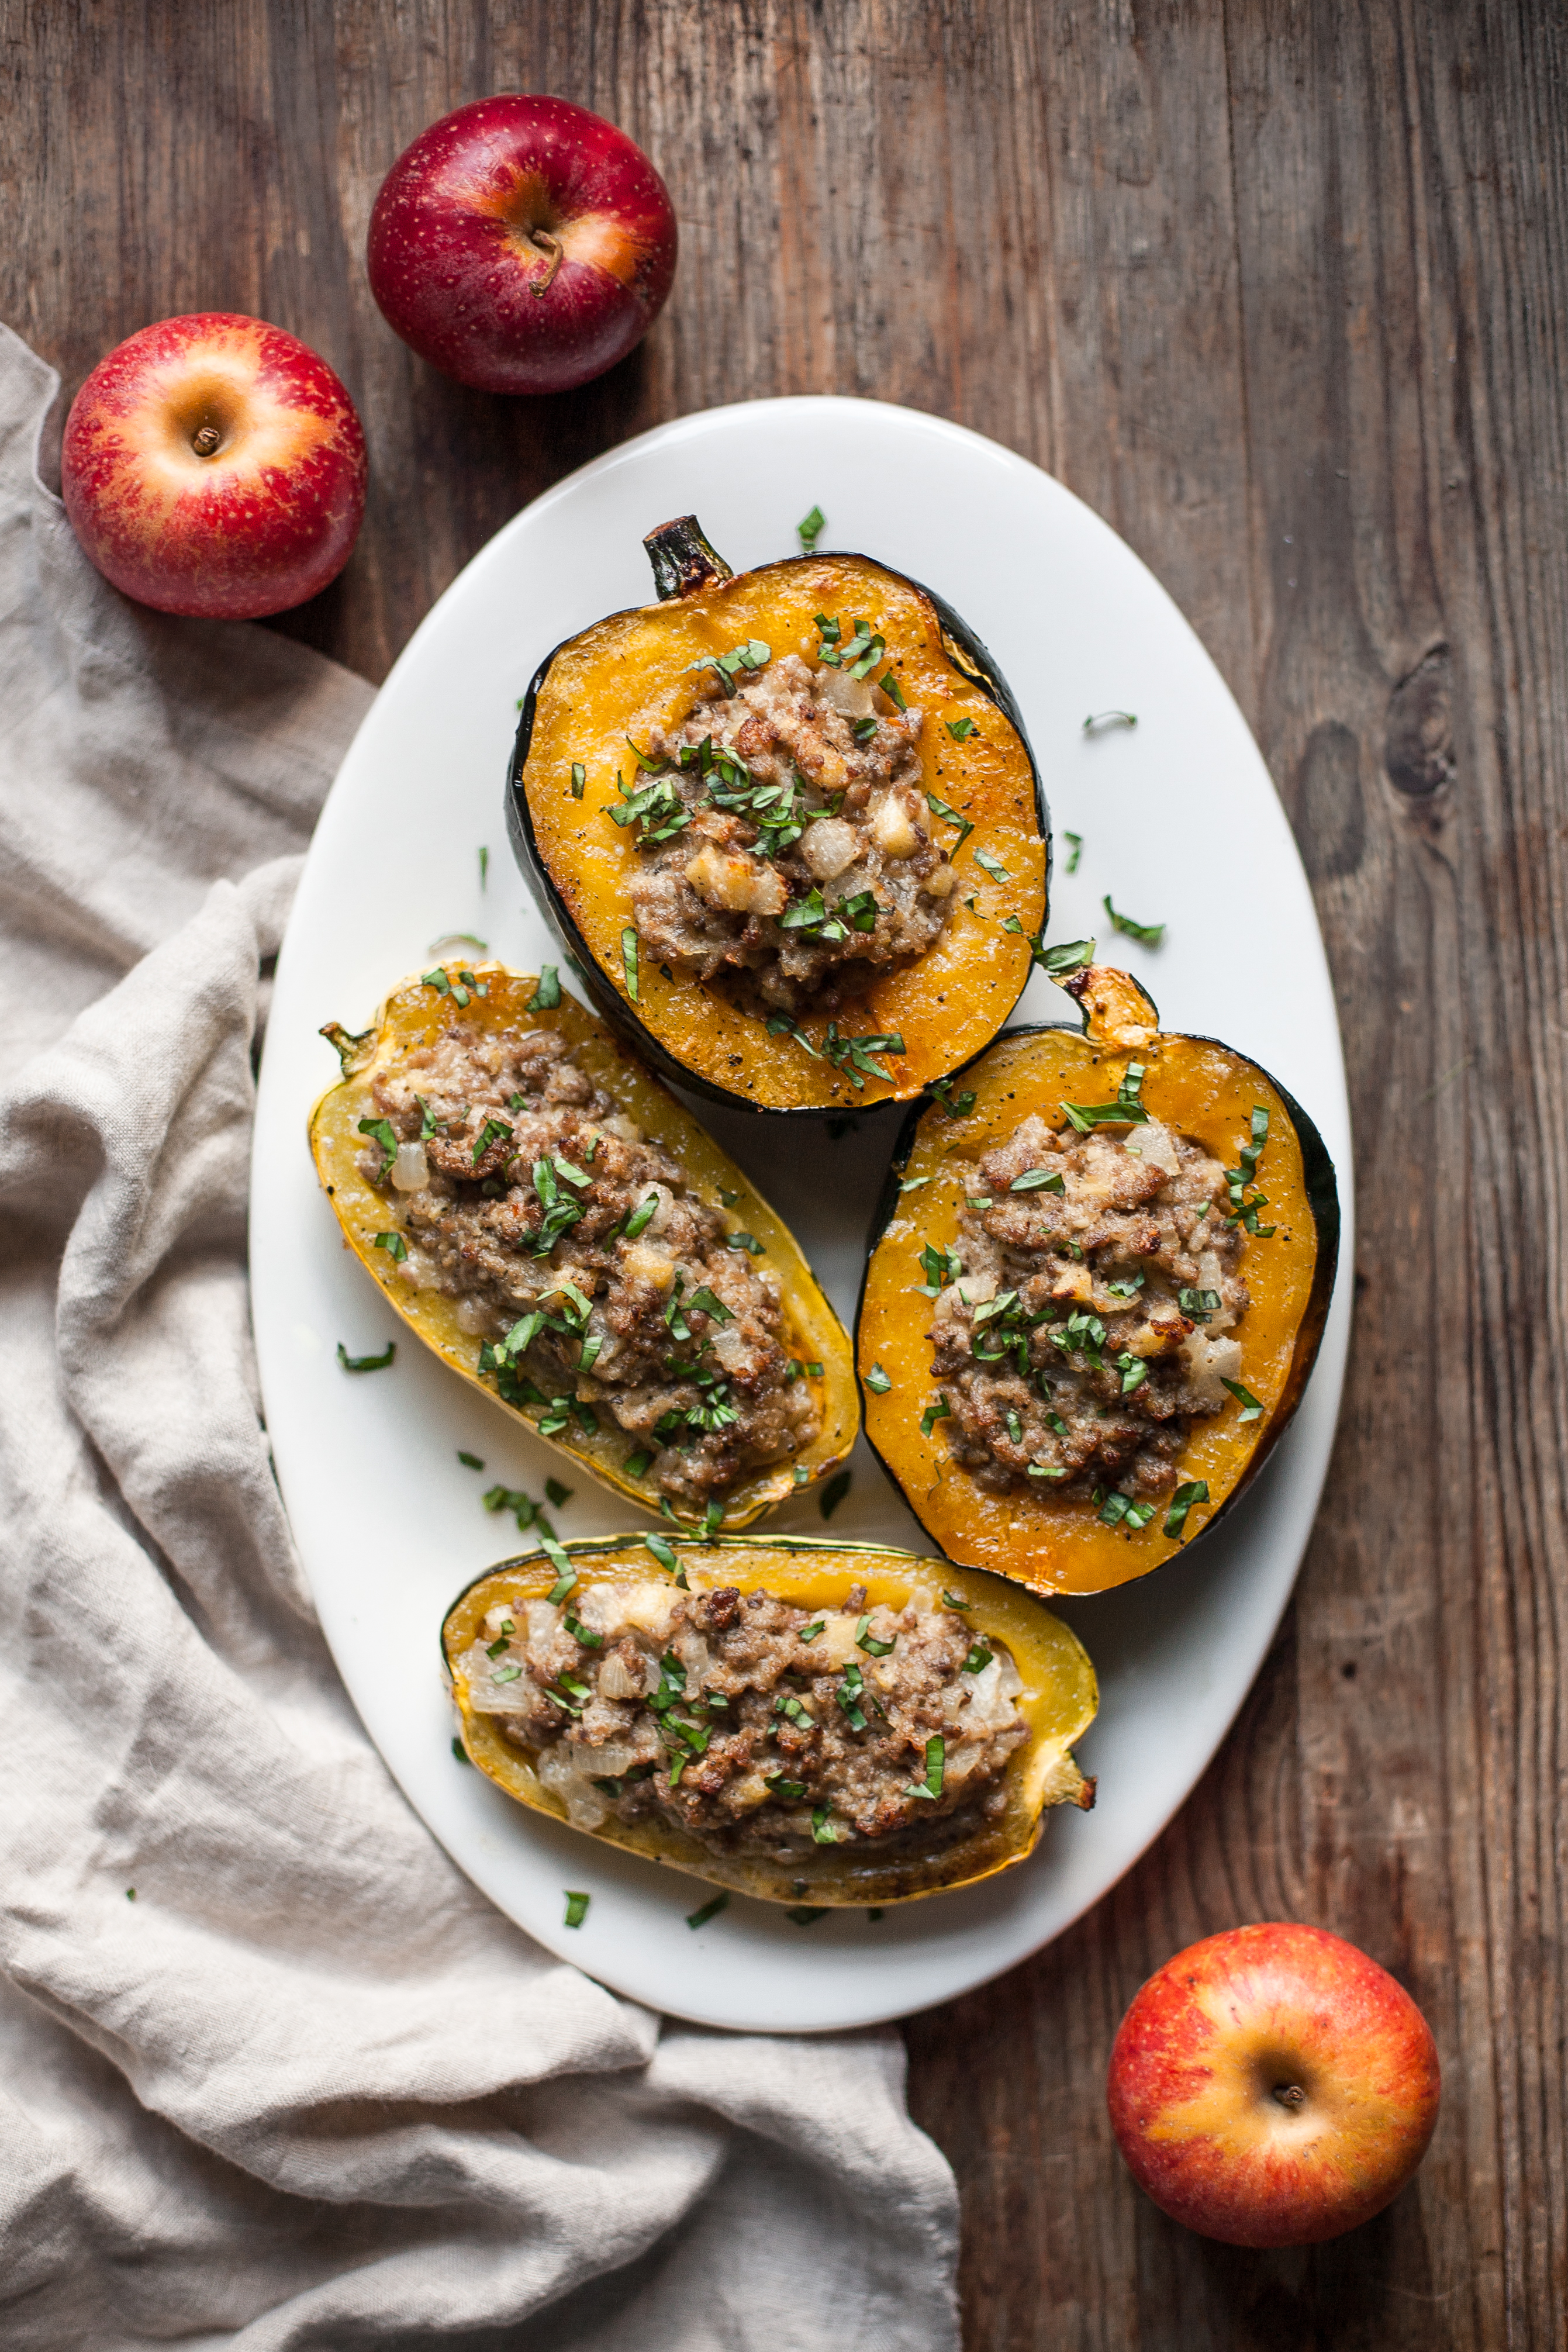 Stuffed Squash with Sausage and Apple